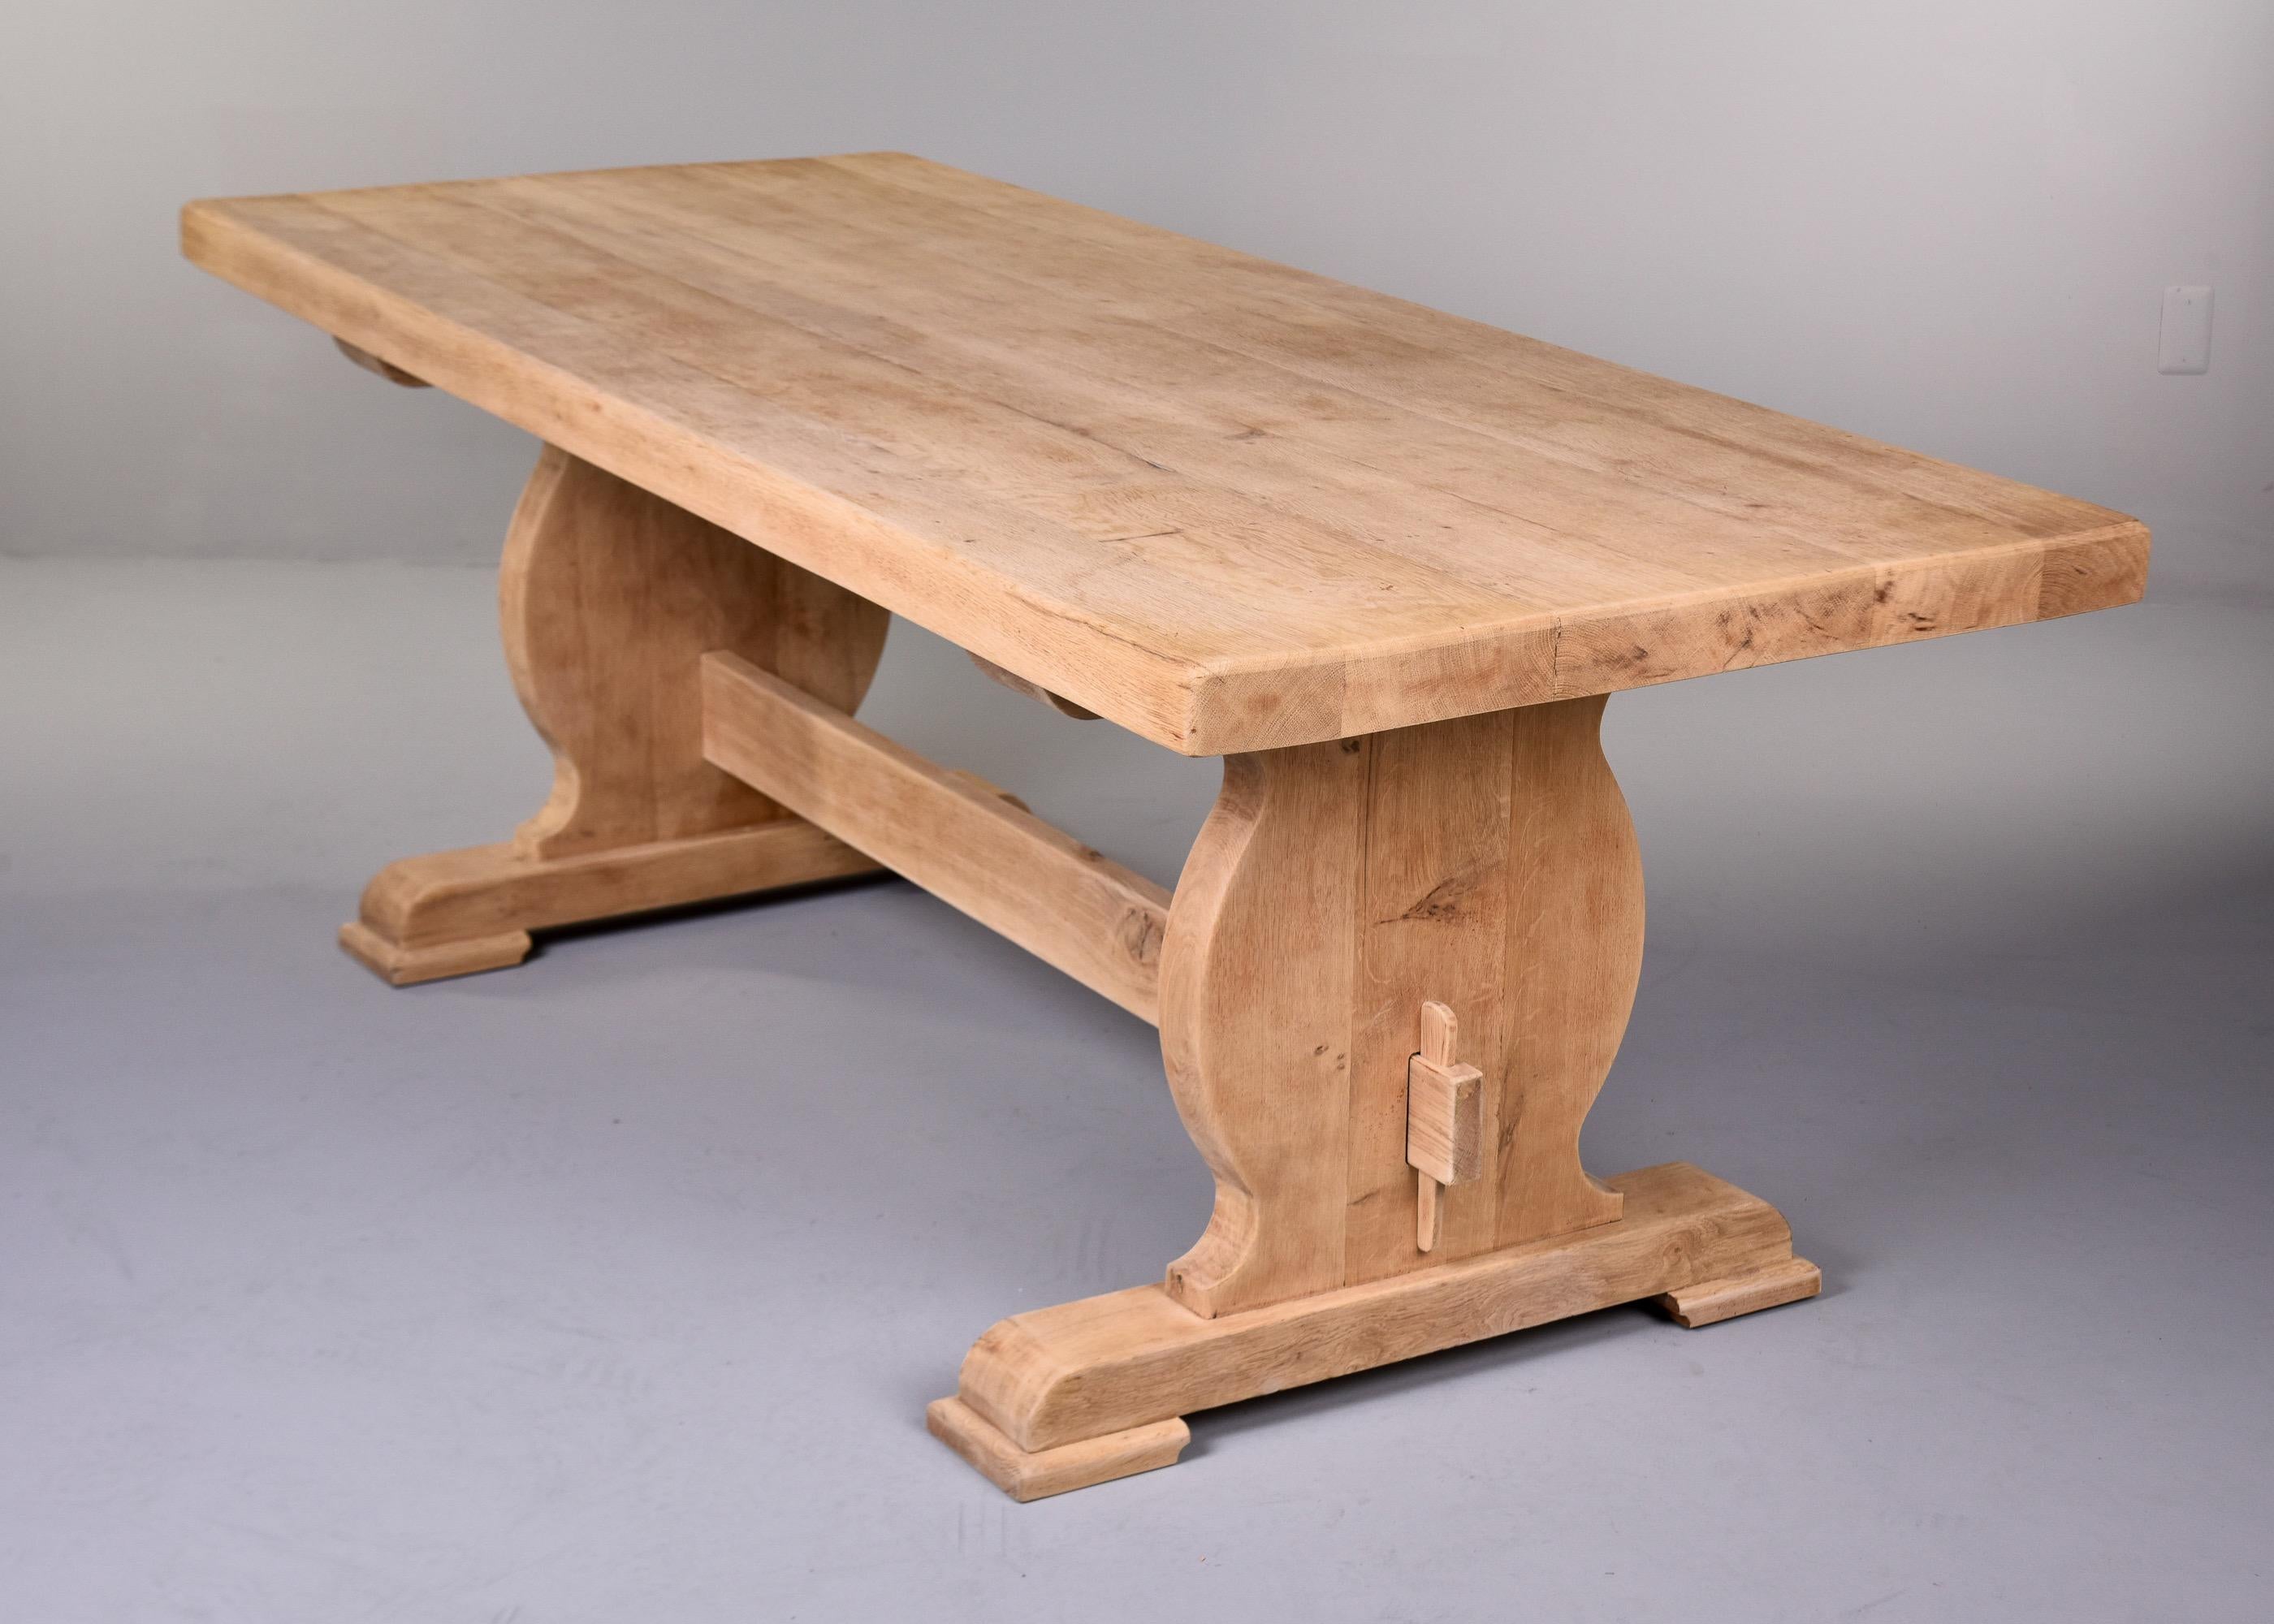 Circa 1900 Sanded Bare Oak French Country Trestle Table For Sale 1